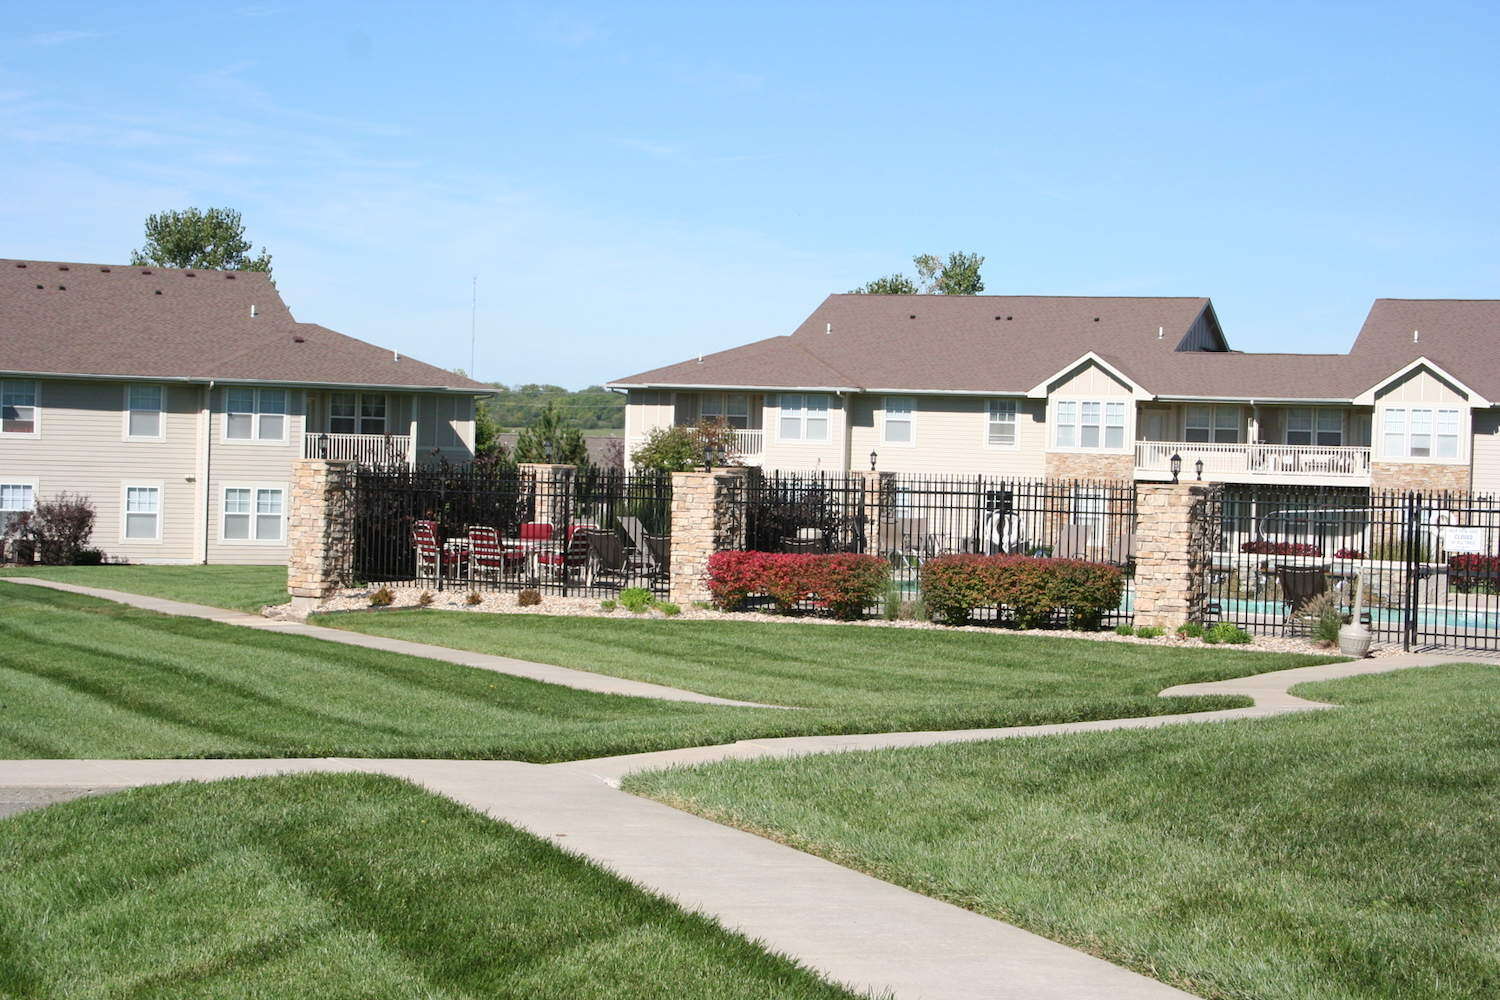 Landscaped grounds of Ironwood Court Apartments with swimming pool